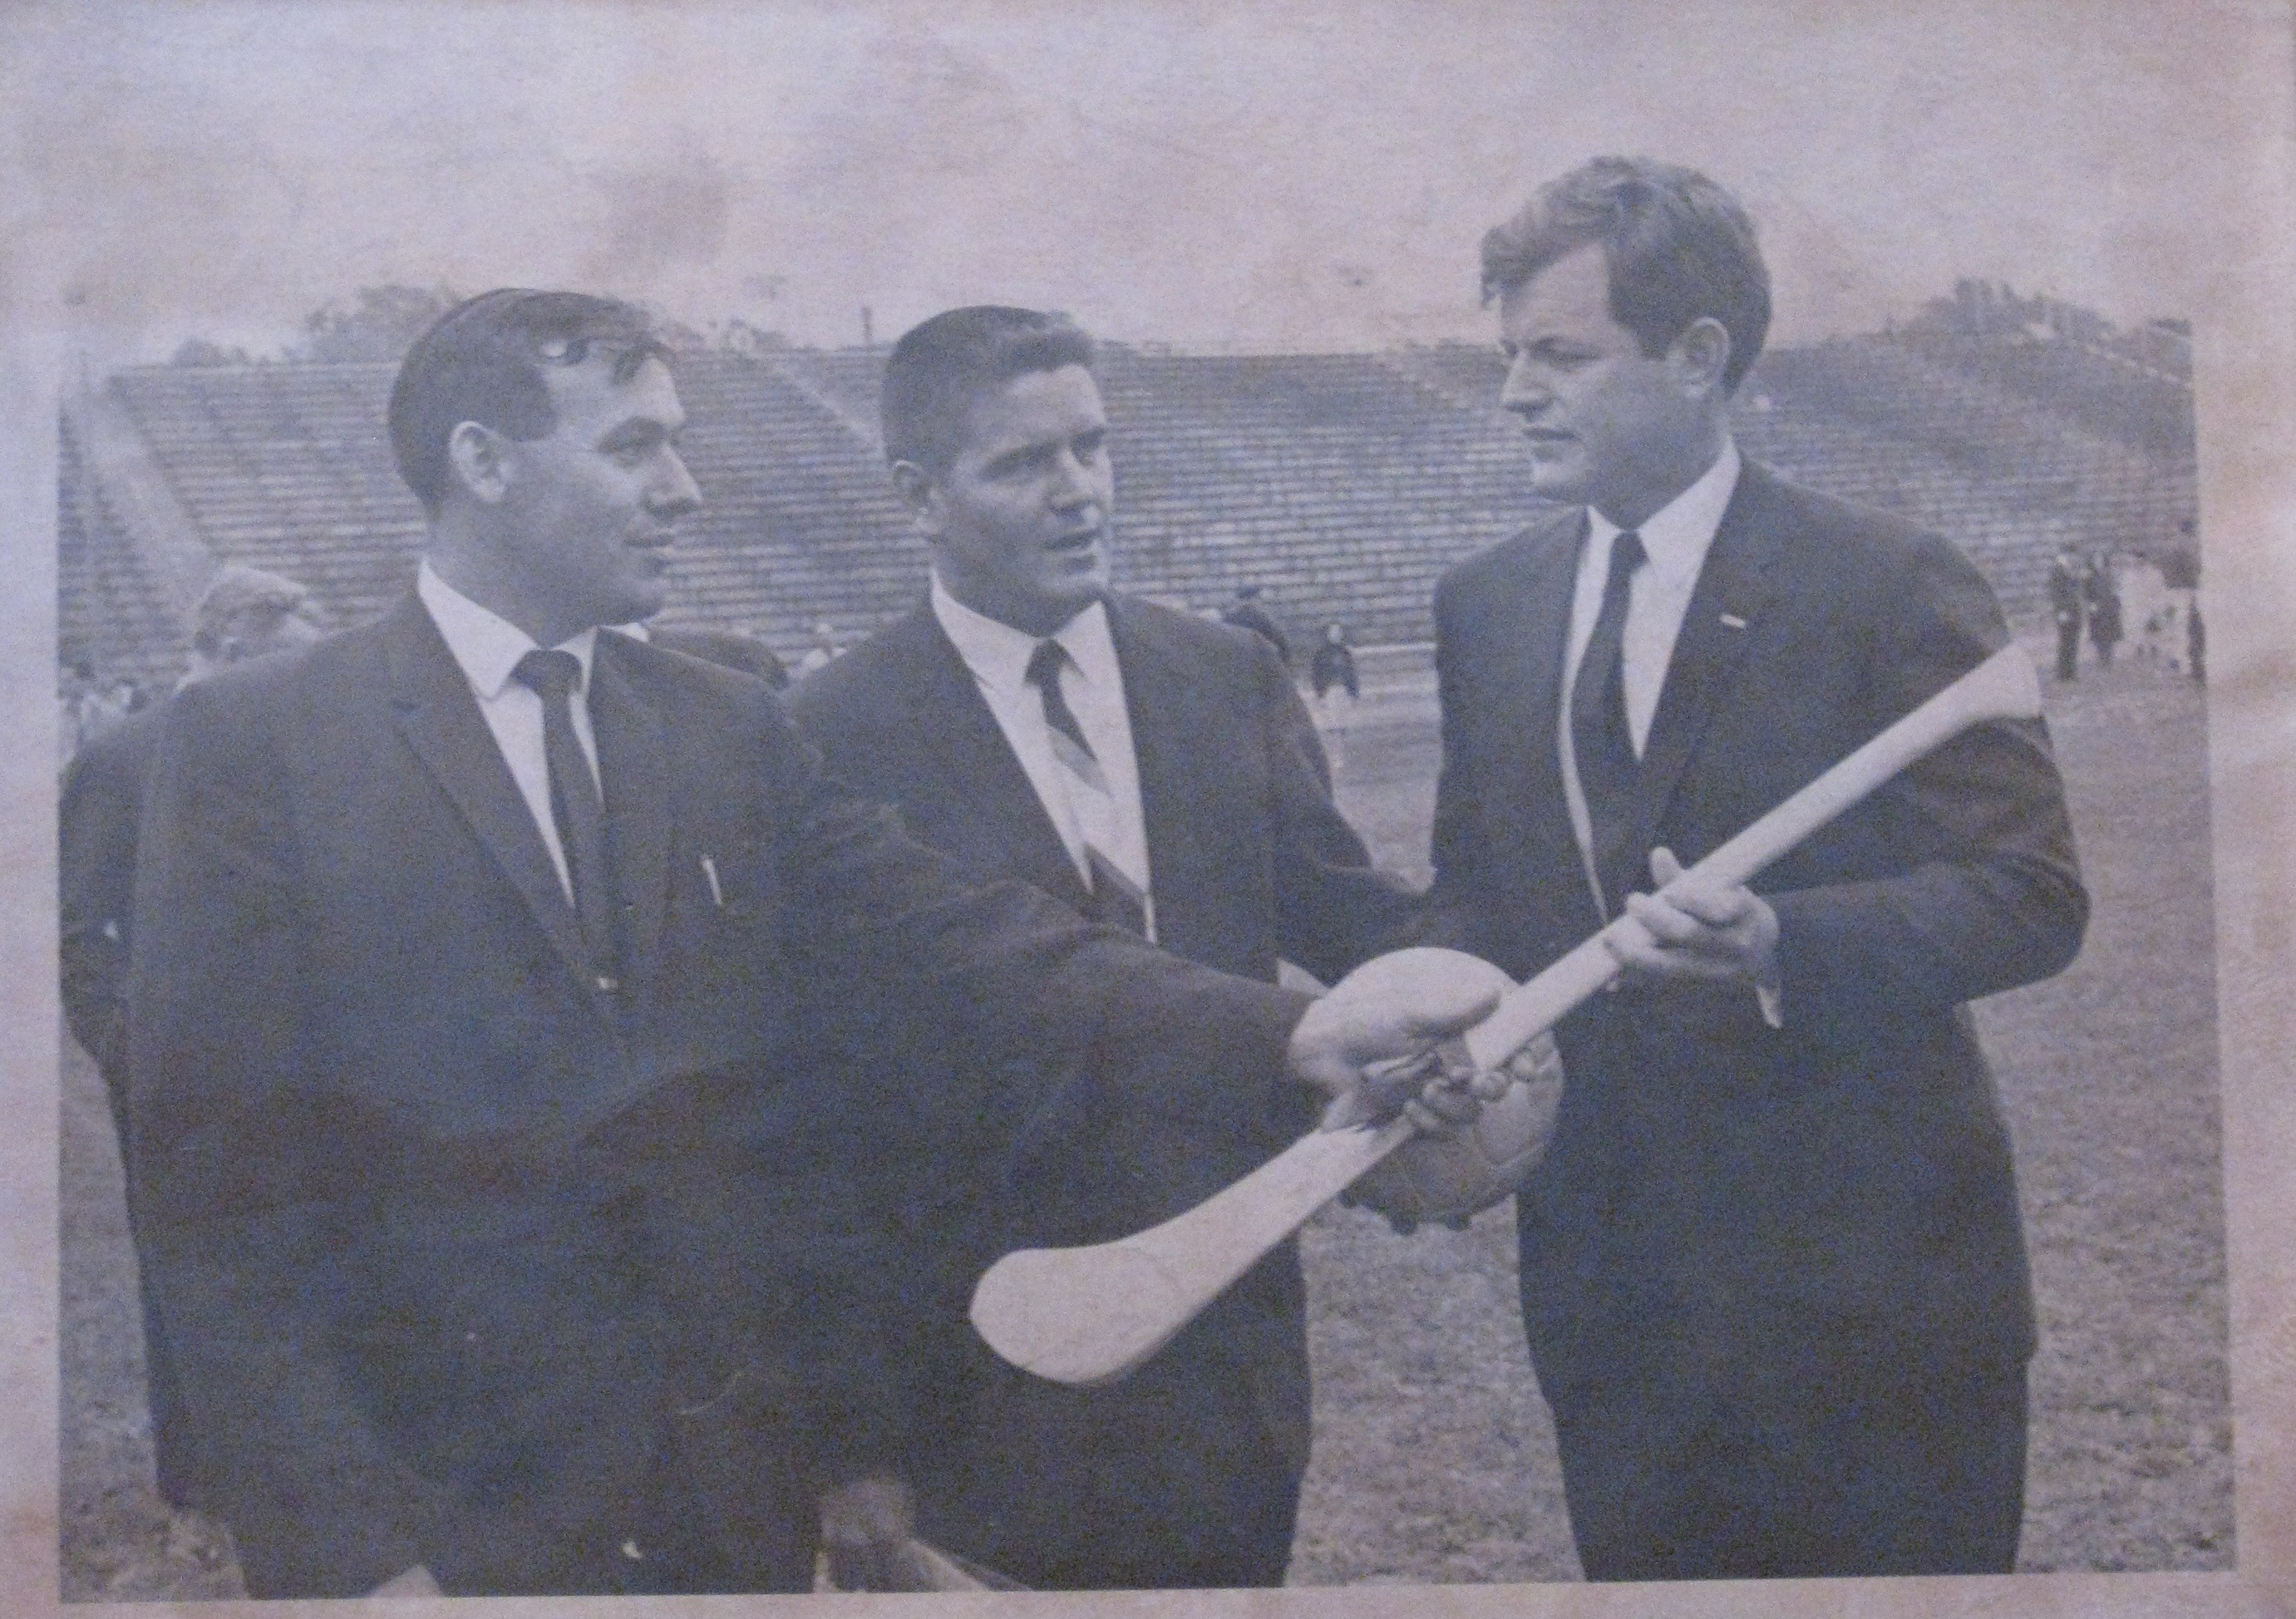 Members of the New Haven Gaelic Football and Hurling Club present a football and hurl to Bobby Kennedy. Politicans were frequent visitors to GAA events across the United States.